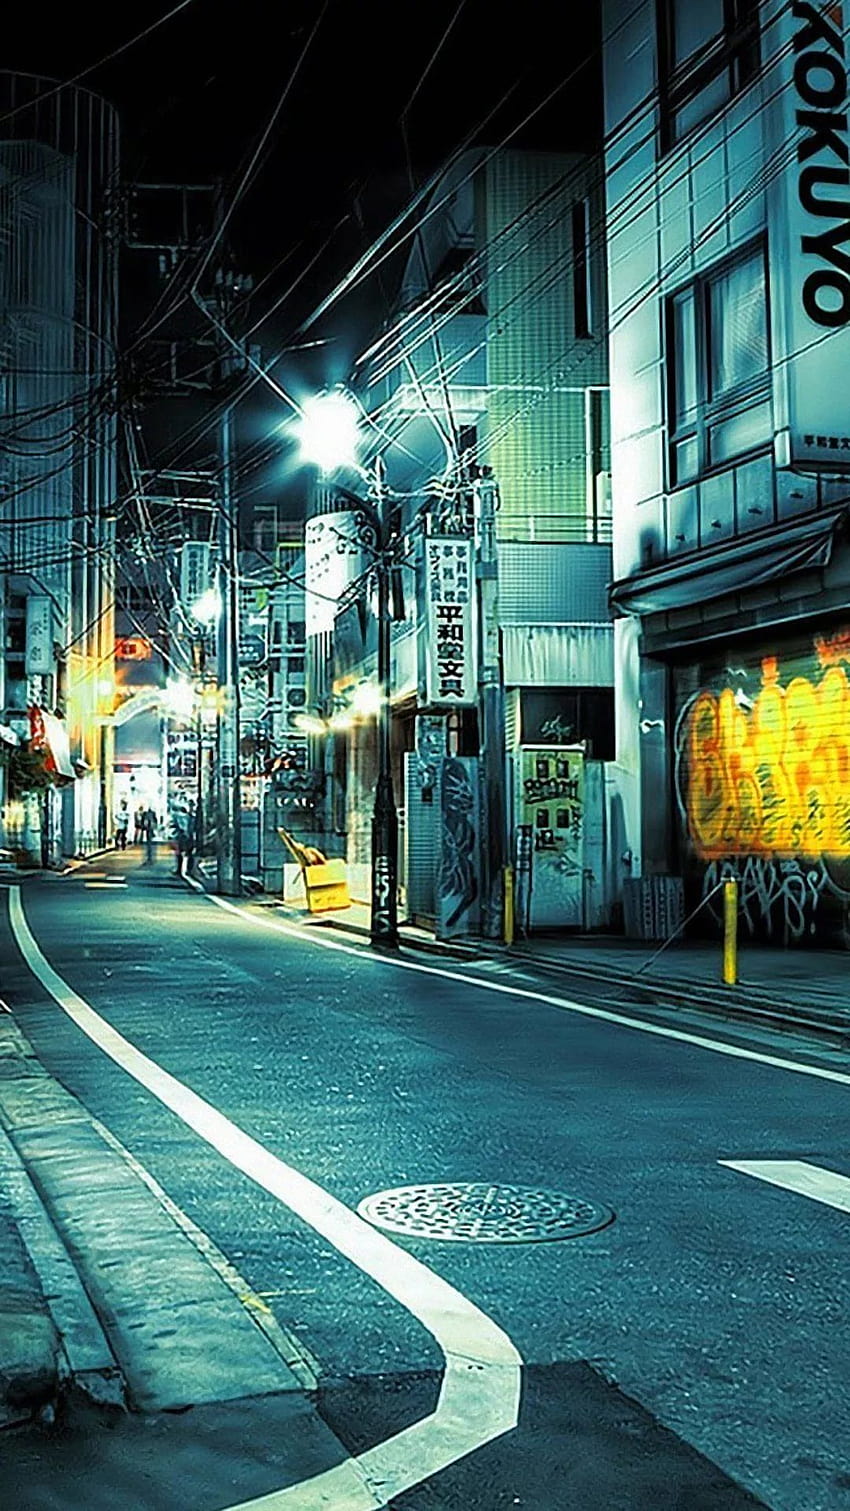 Japan Street by Pikswell on DeviantArt